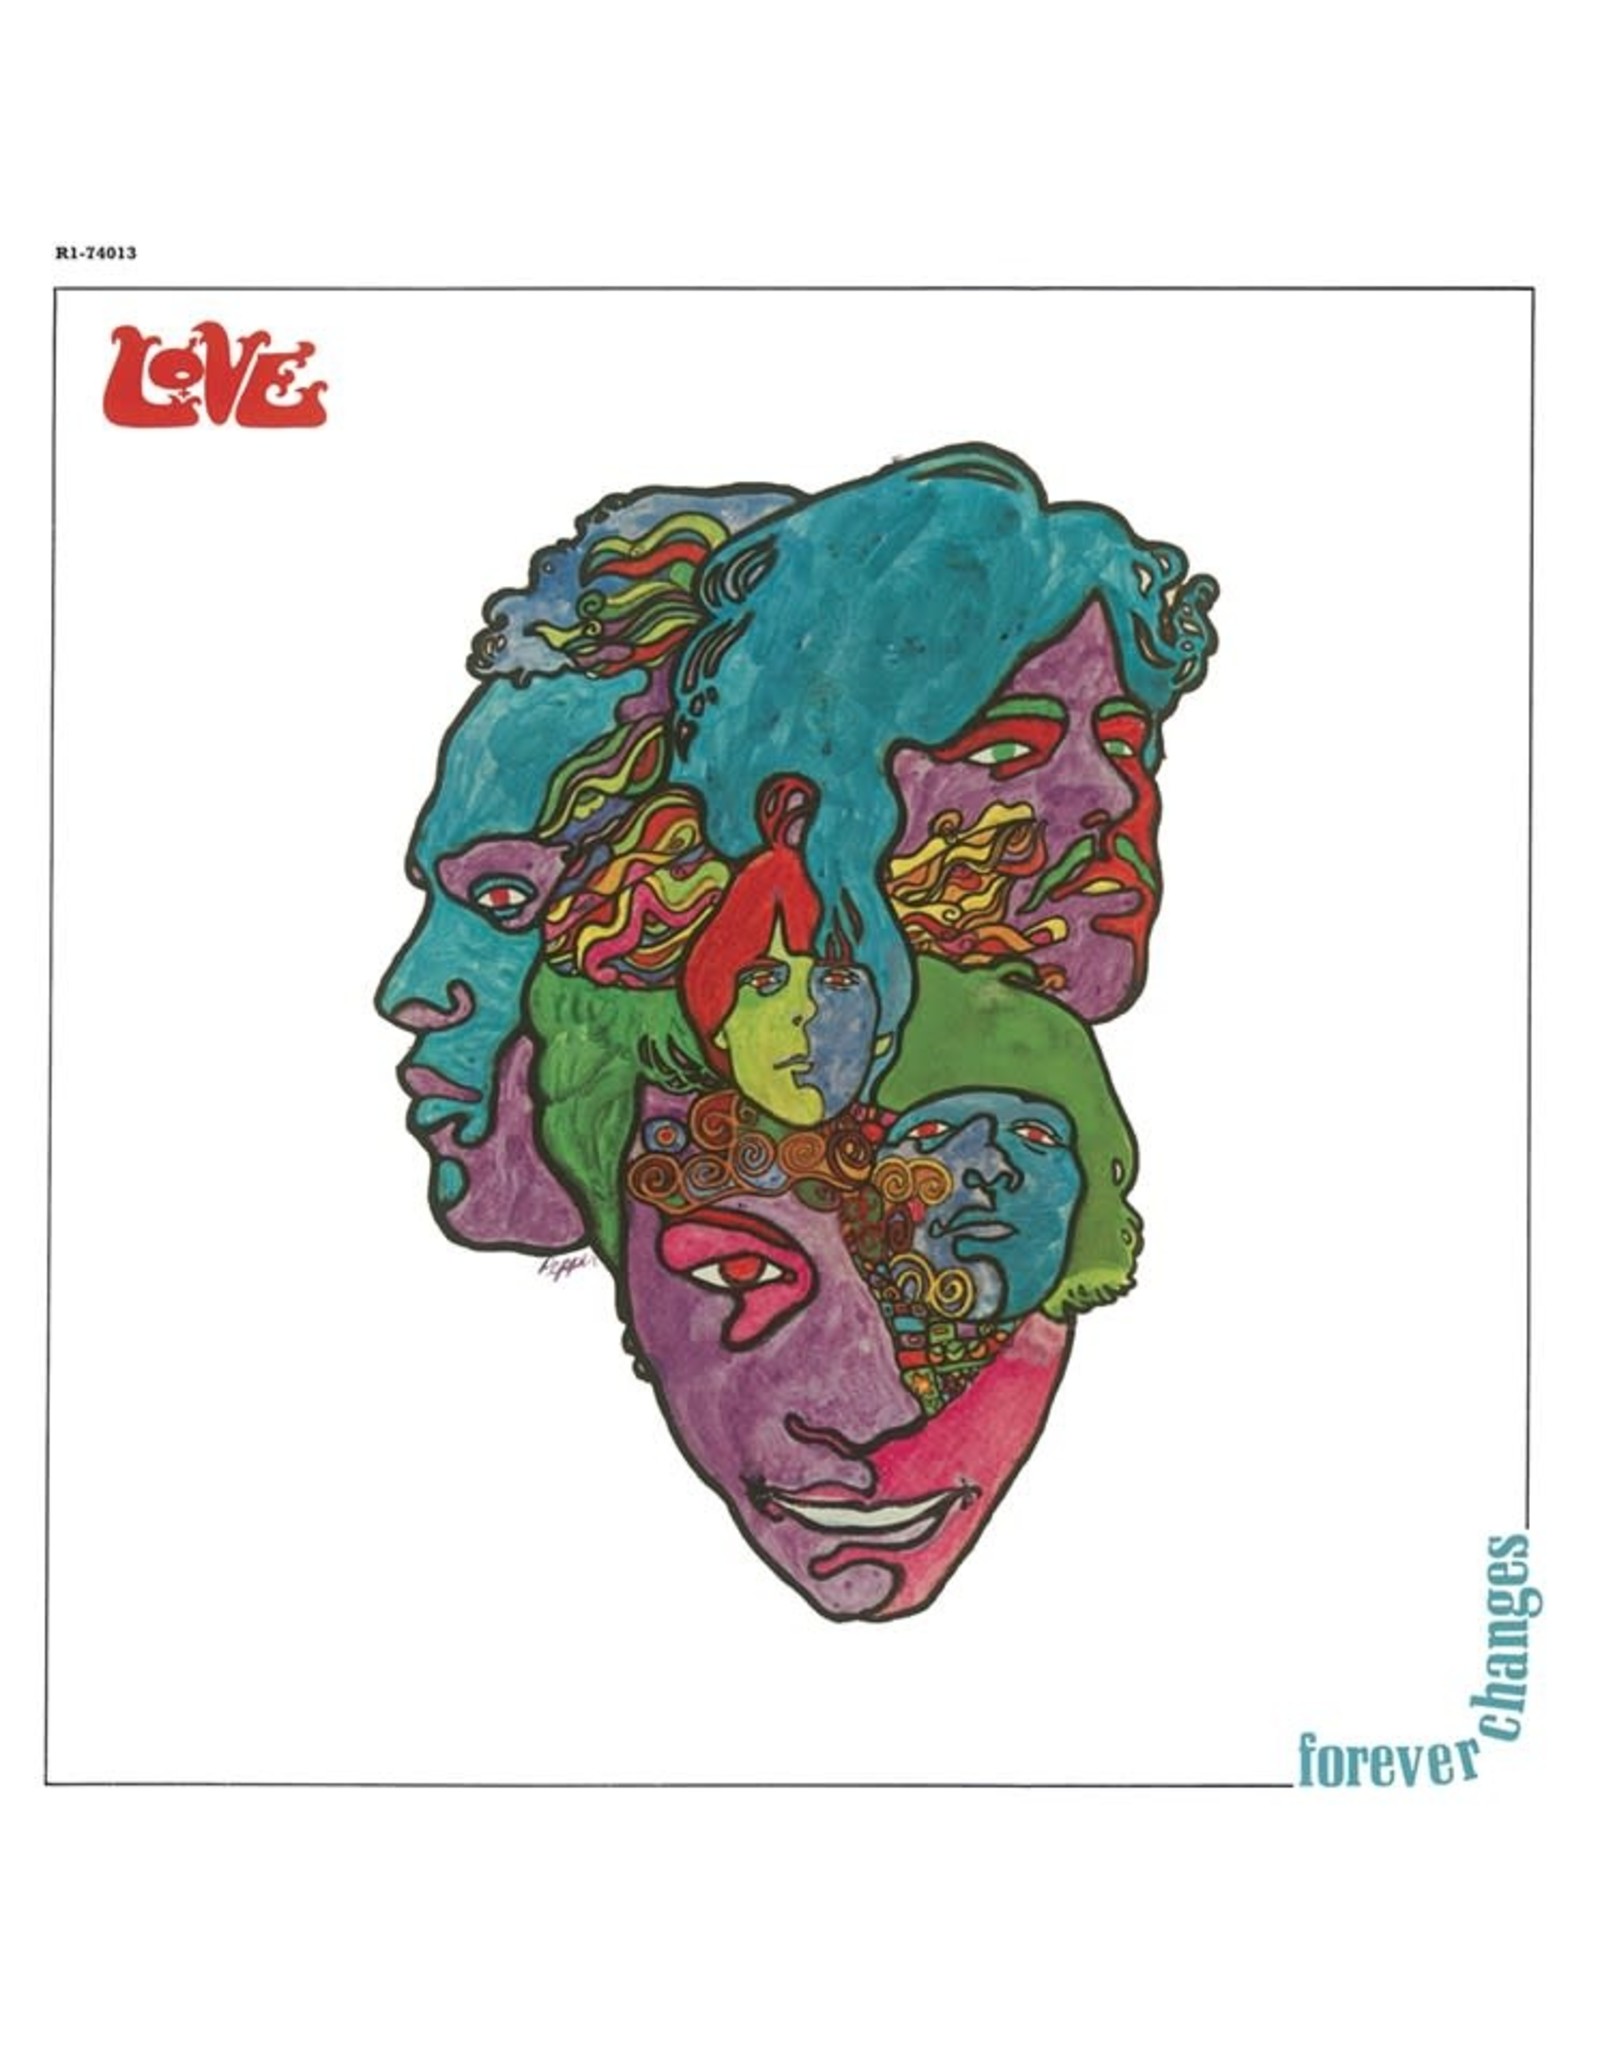 Love - Forever Changes (45th Anniversary)